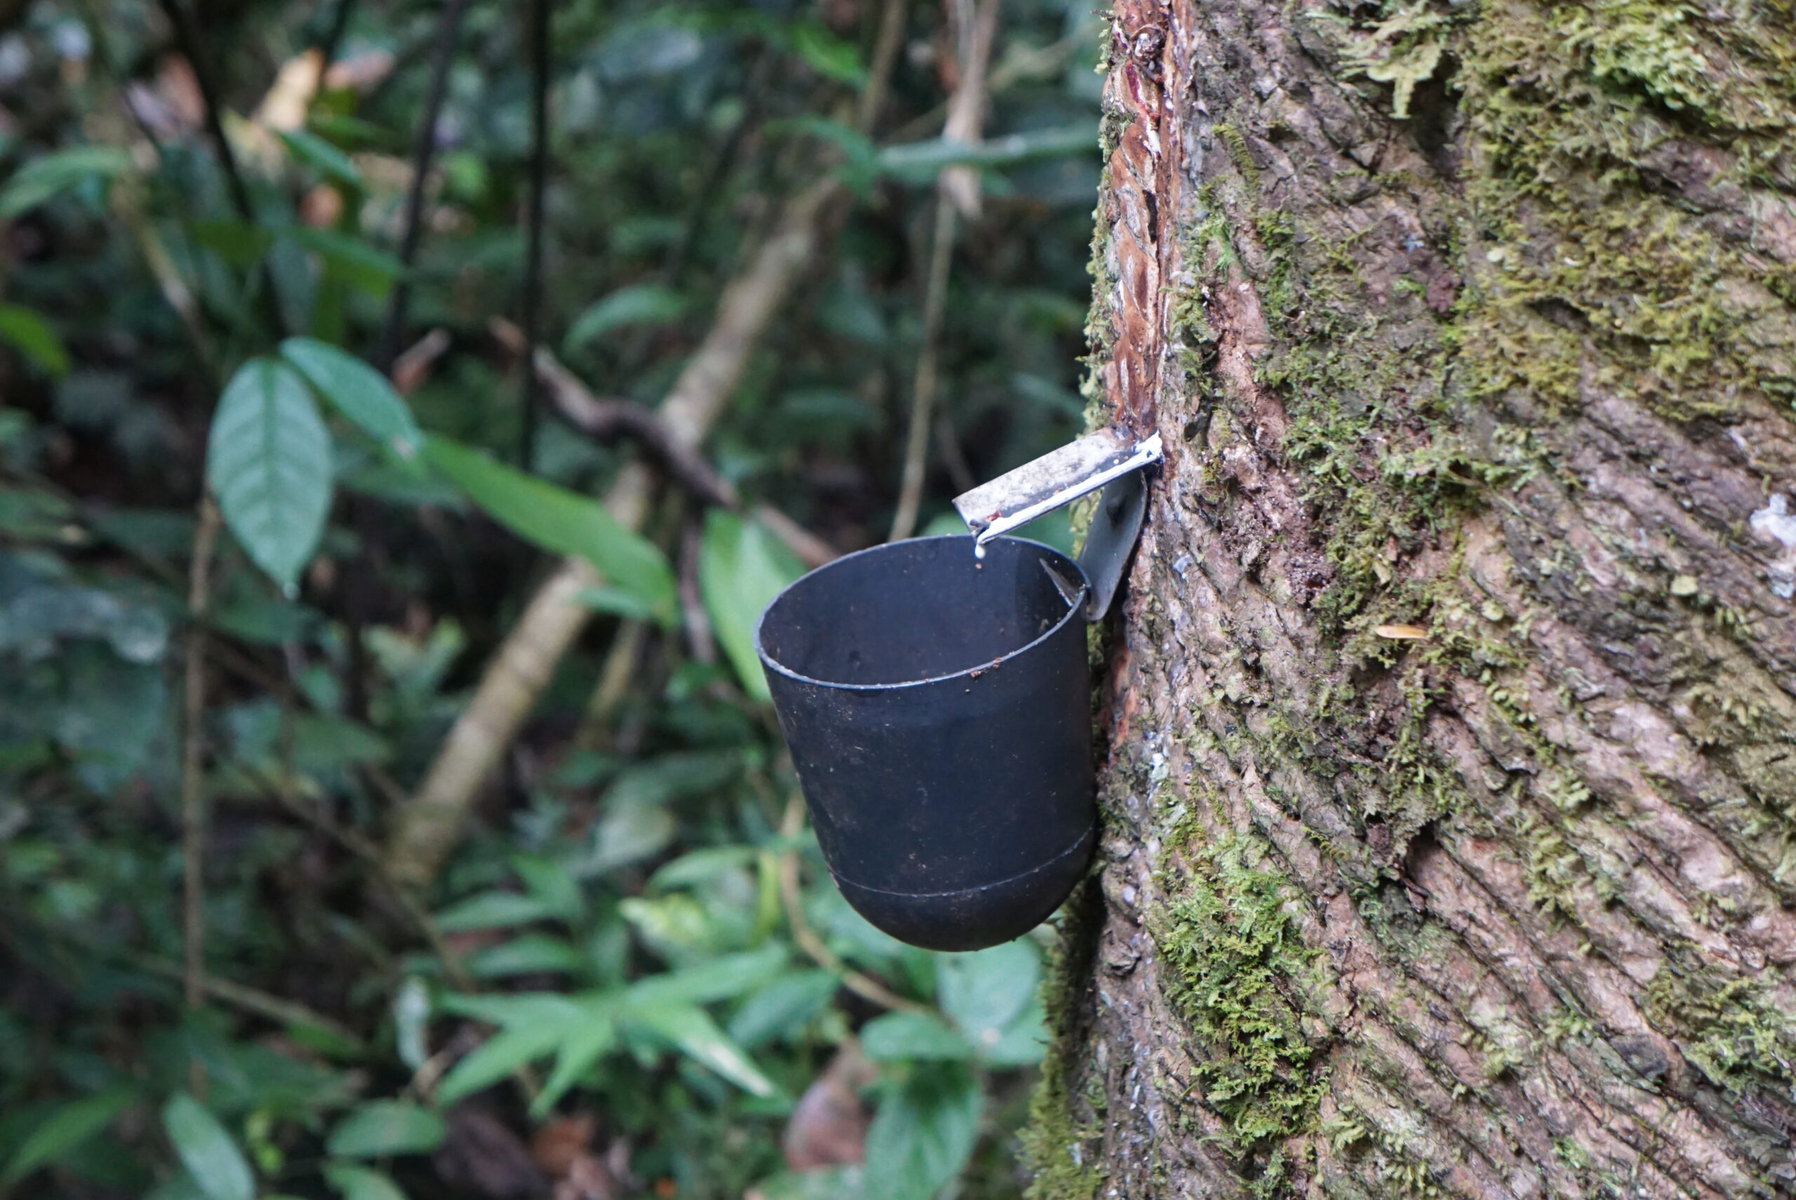 Rubber tapping in the Amazon